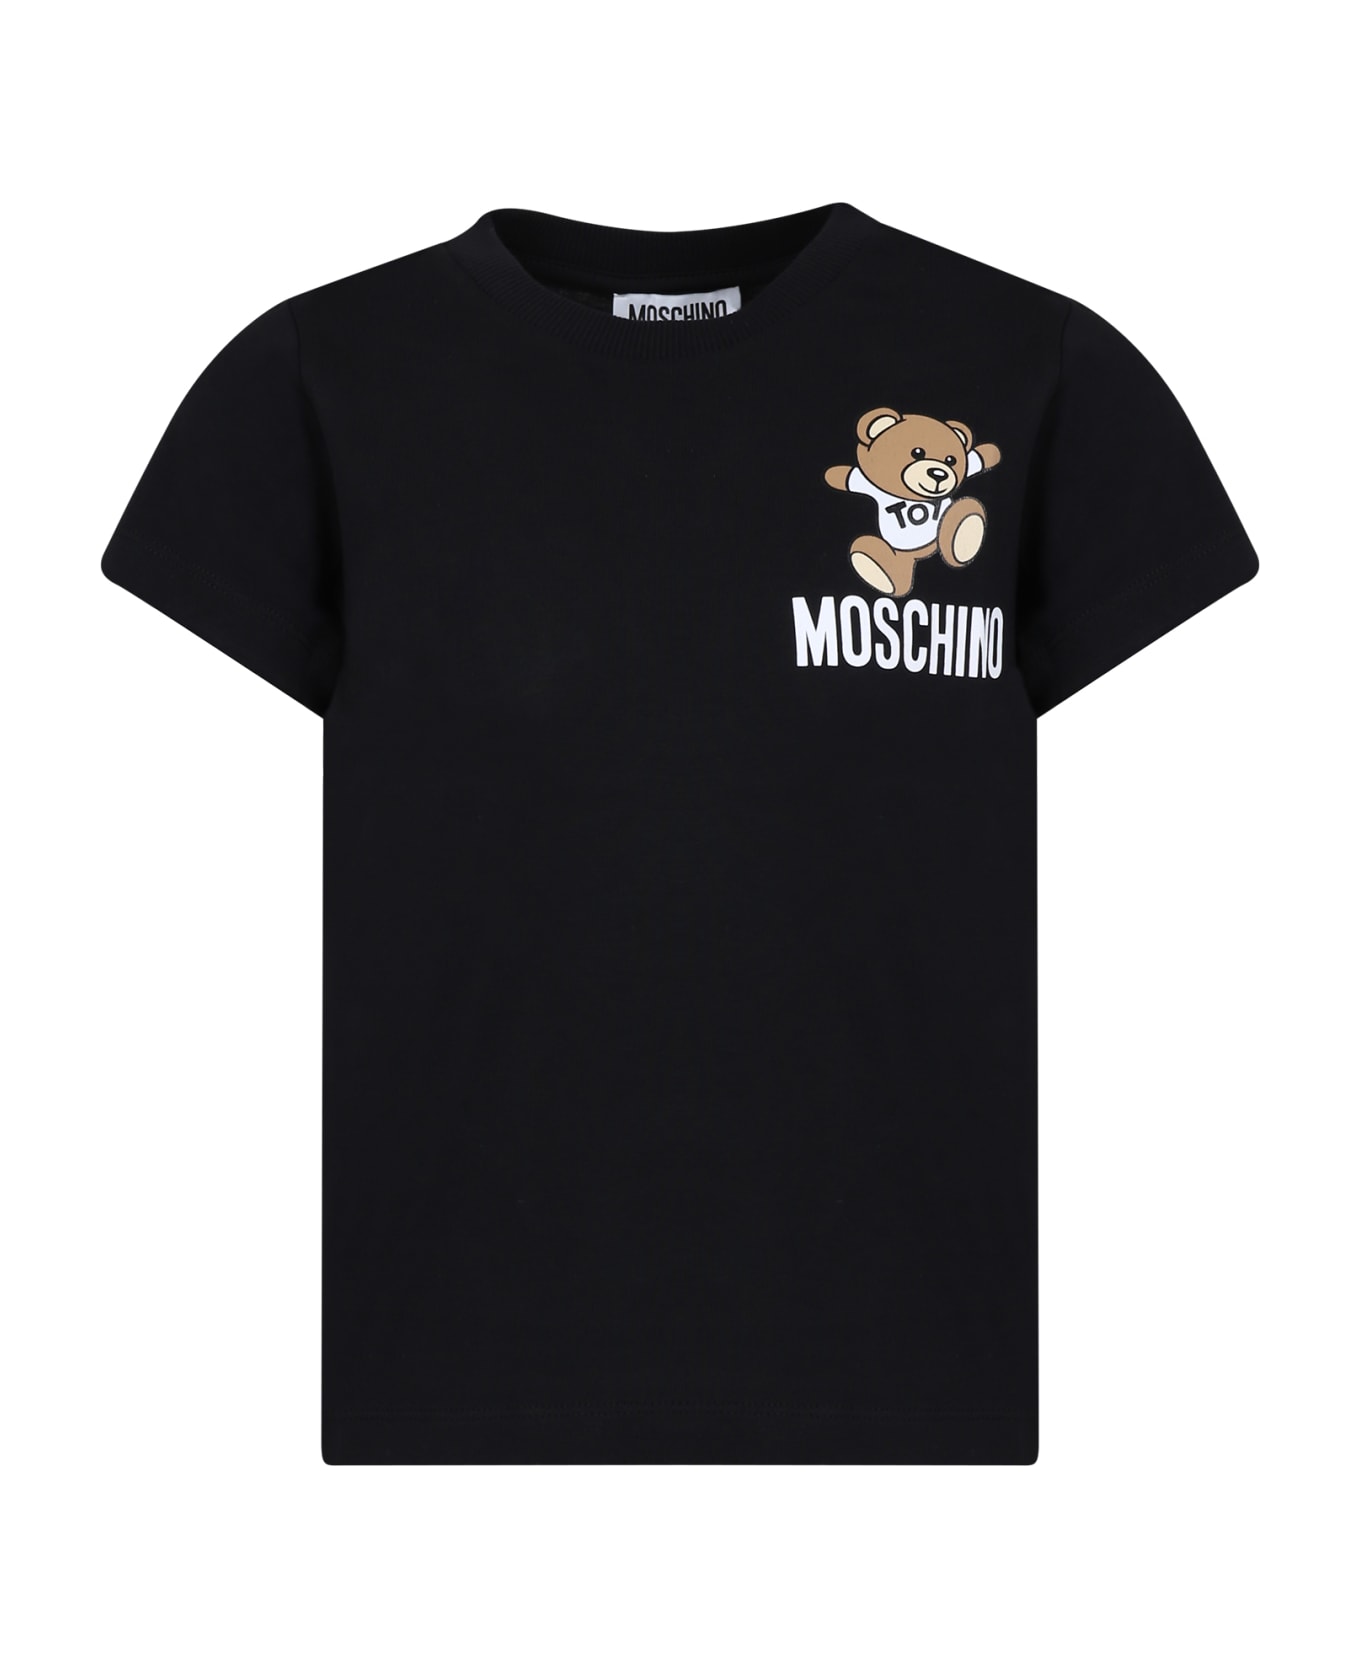 Moschino Black T-shirt For Kids With Teddy Bear And Logo - Black